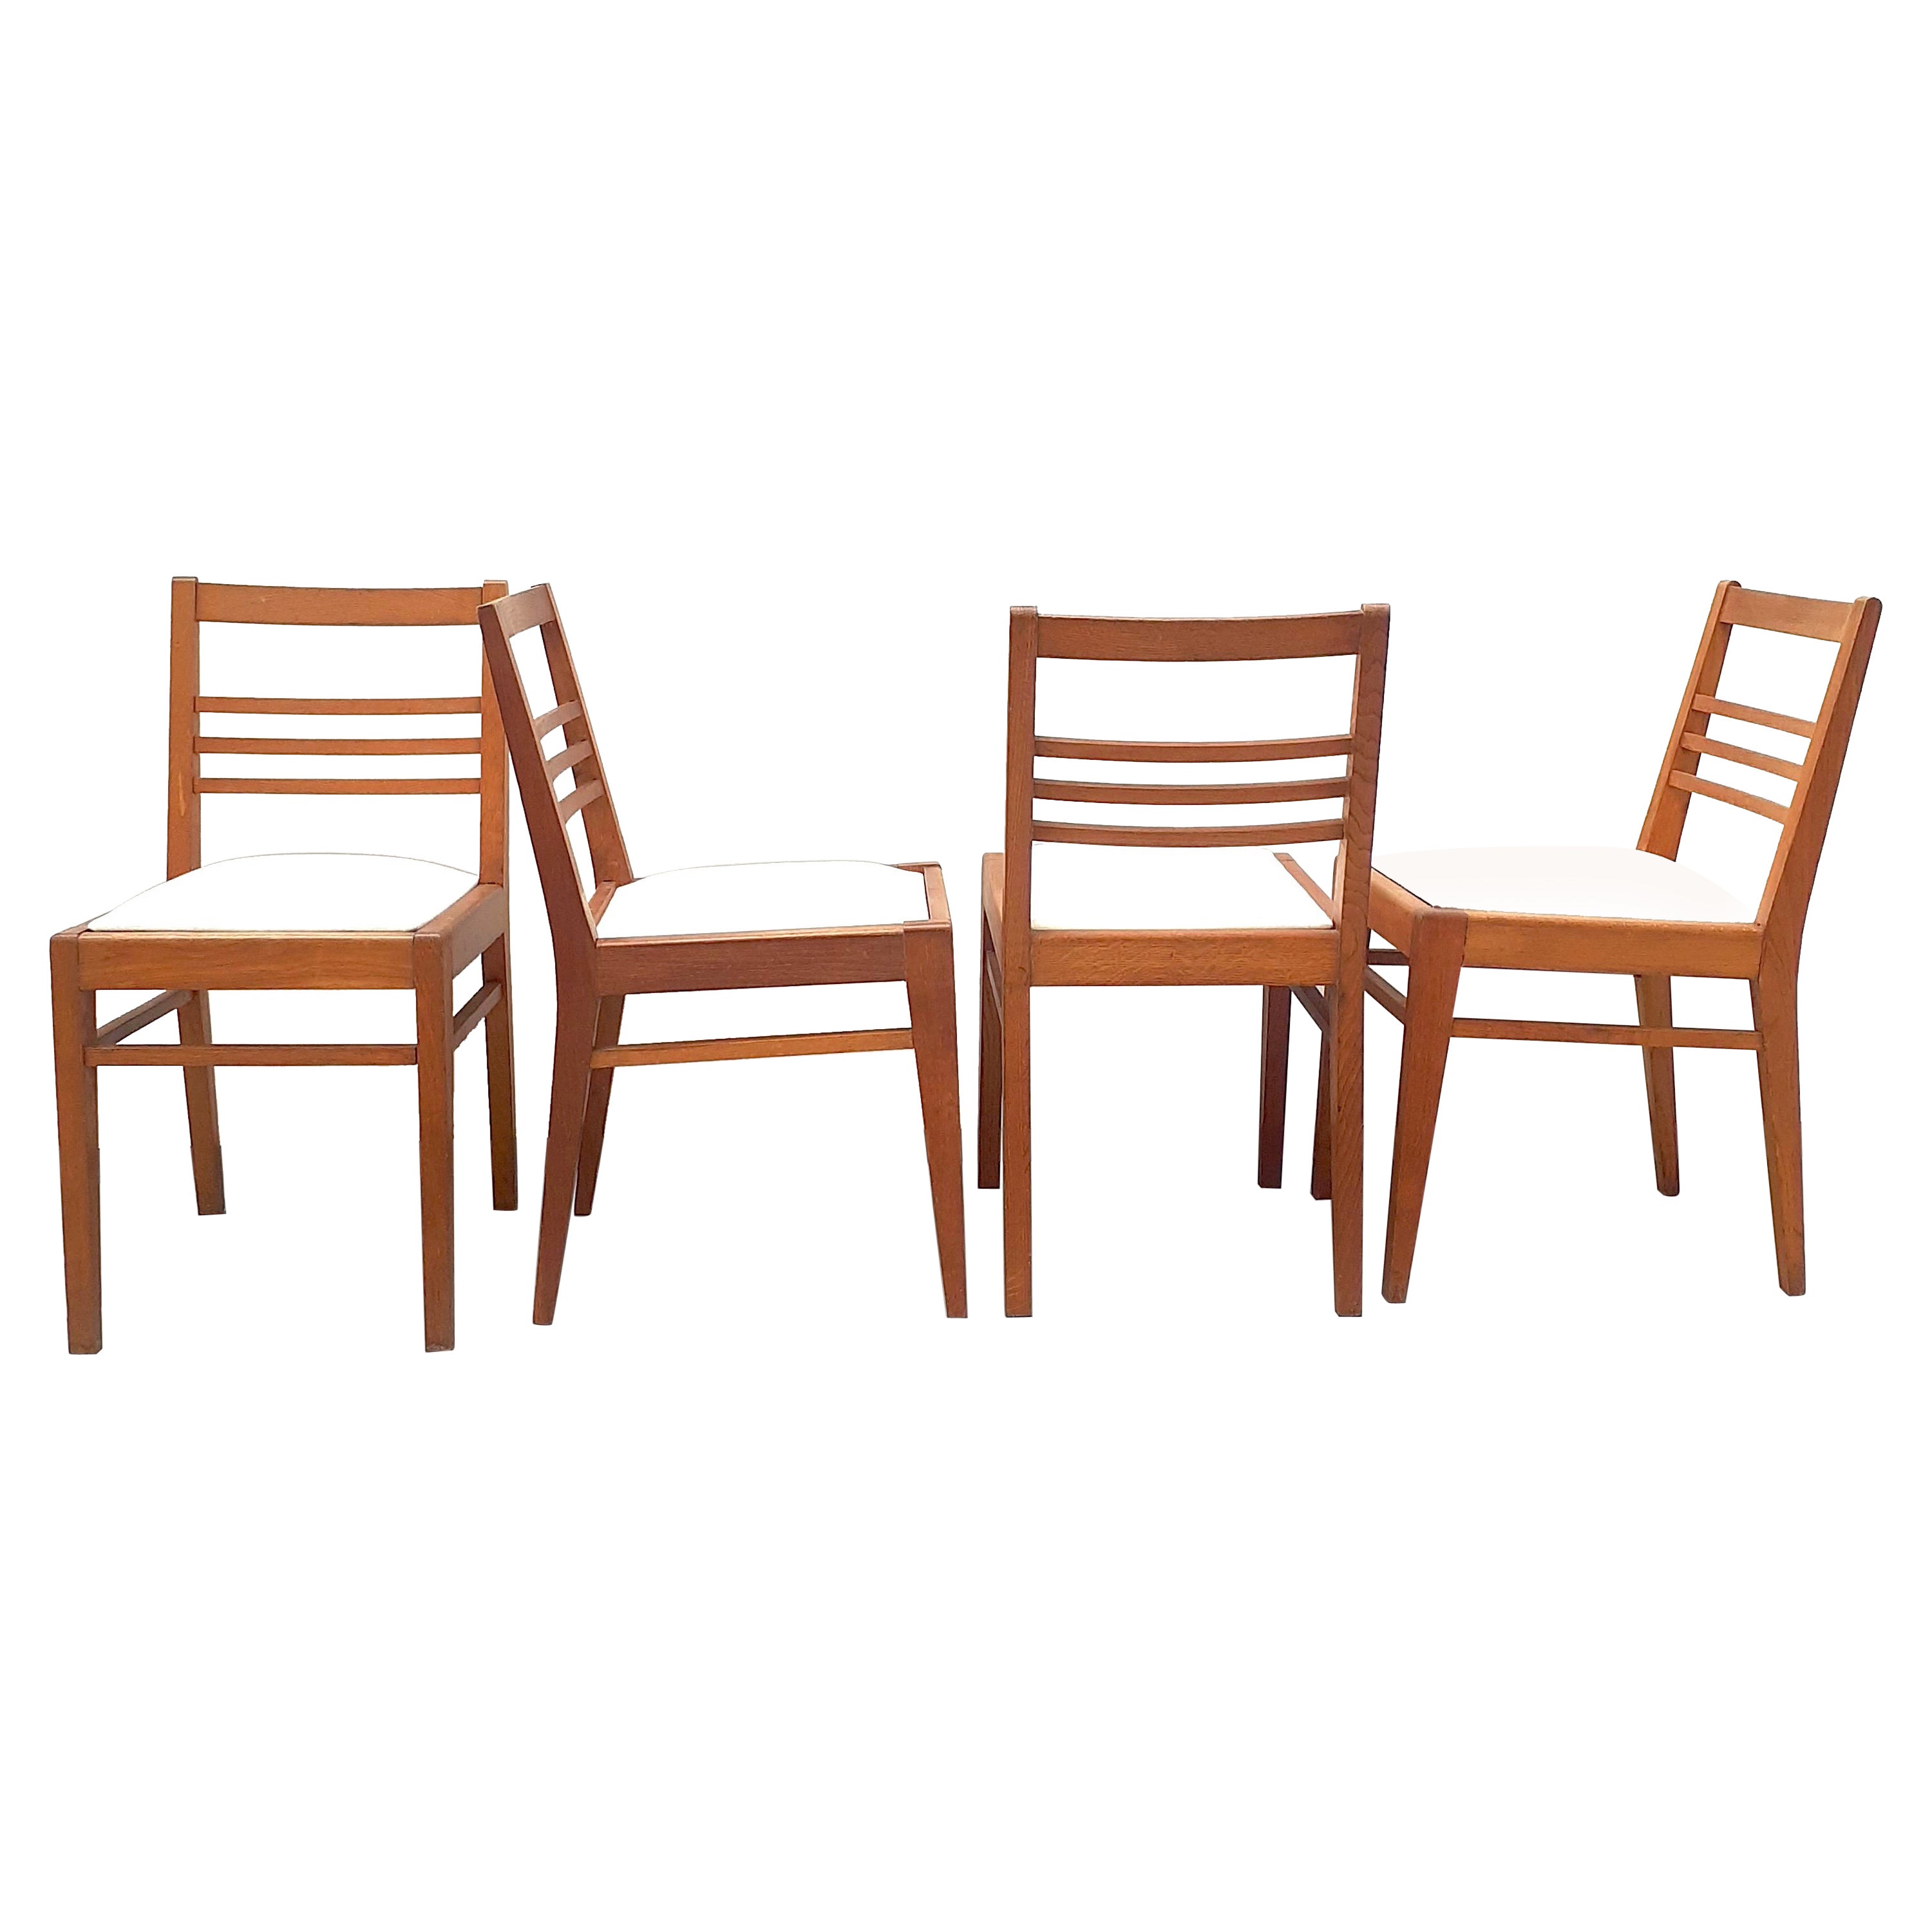 Set of 4 Oak Chairs with White Fabric Seat by René Gabriel, 1950s